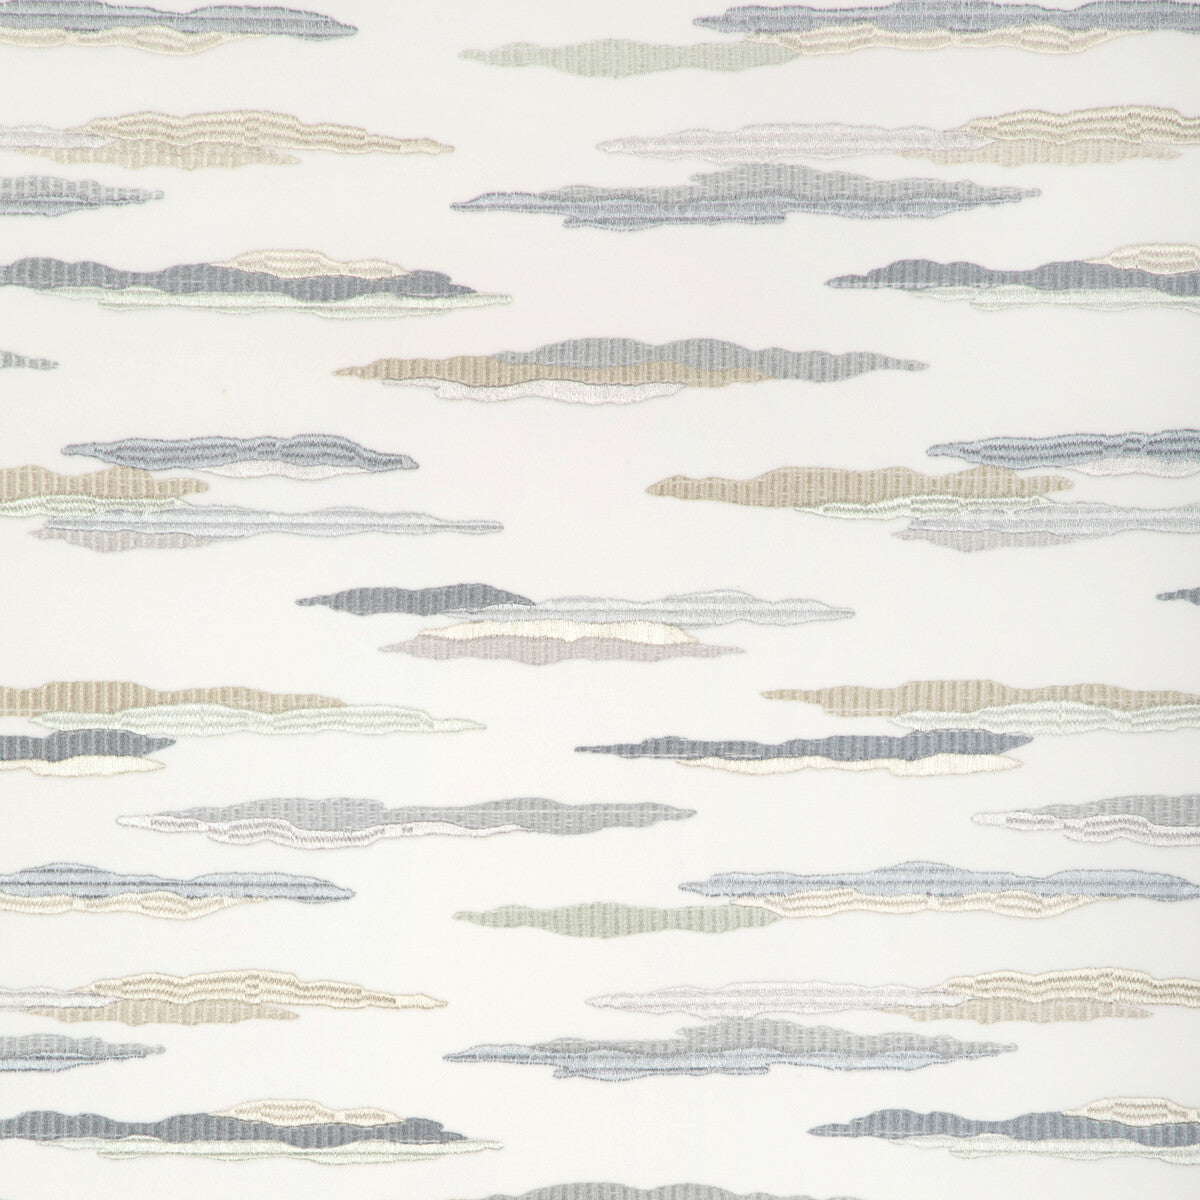 Constant Motion fabric in mineral color - pattern 36819.15.0 - by Kravet Design in the Candice Olson collection